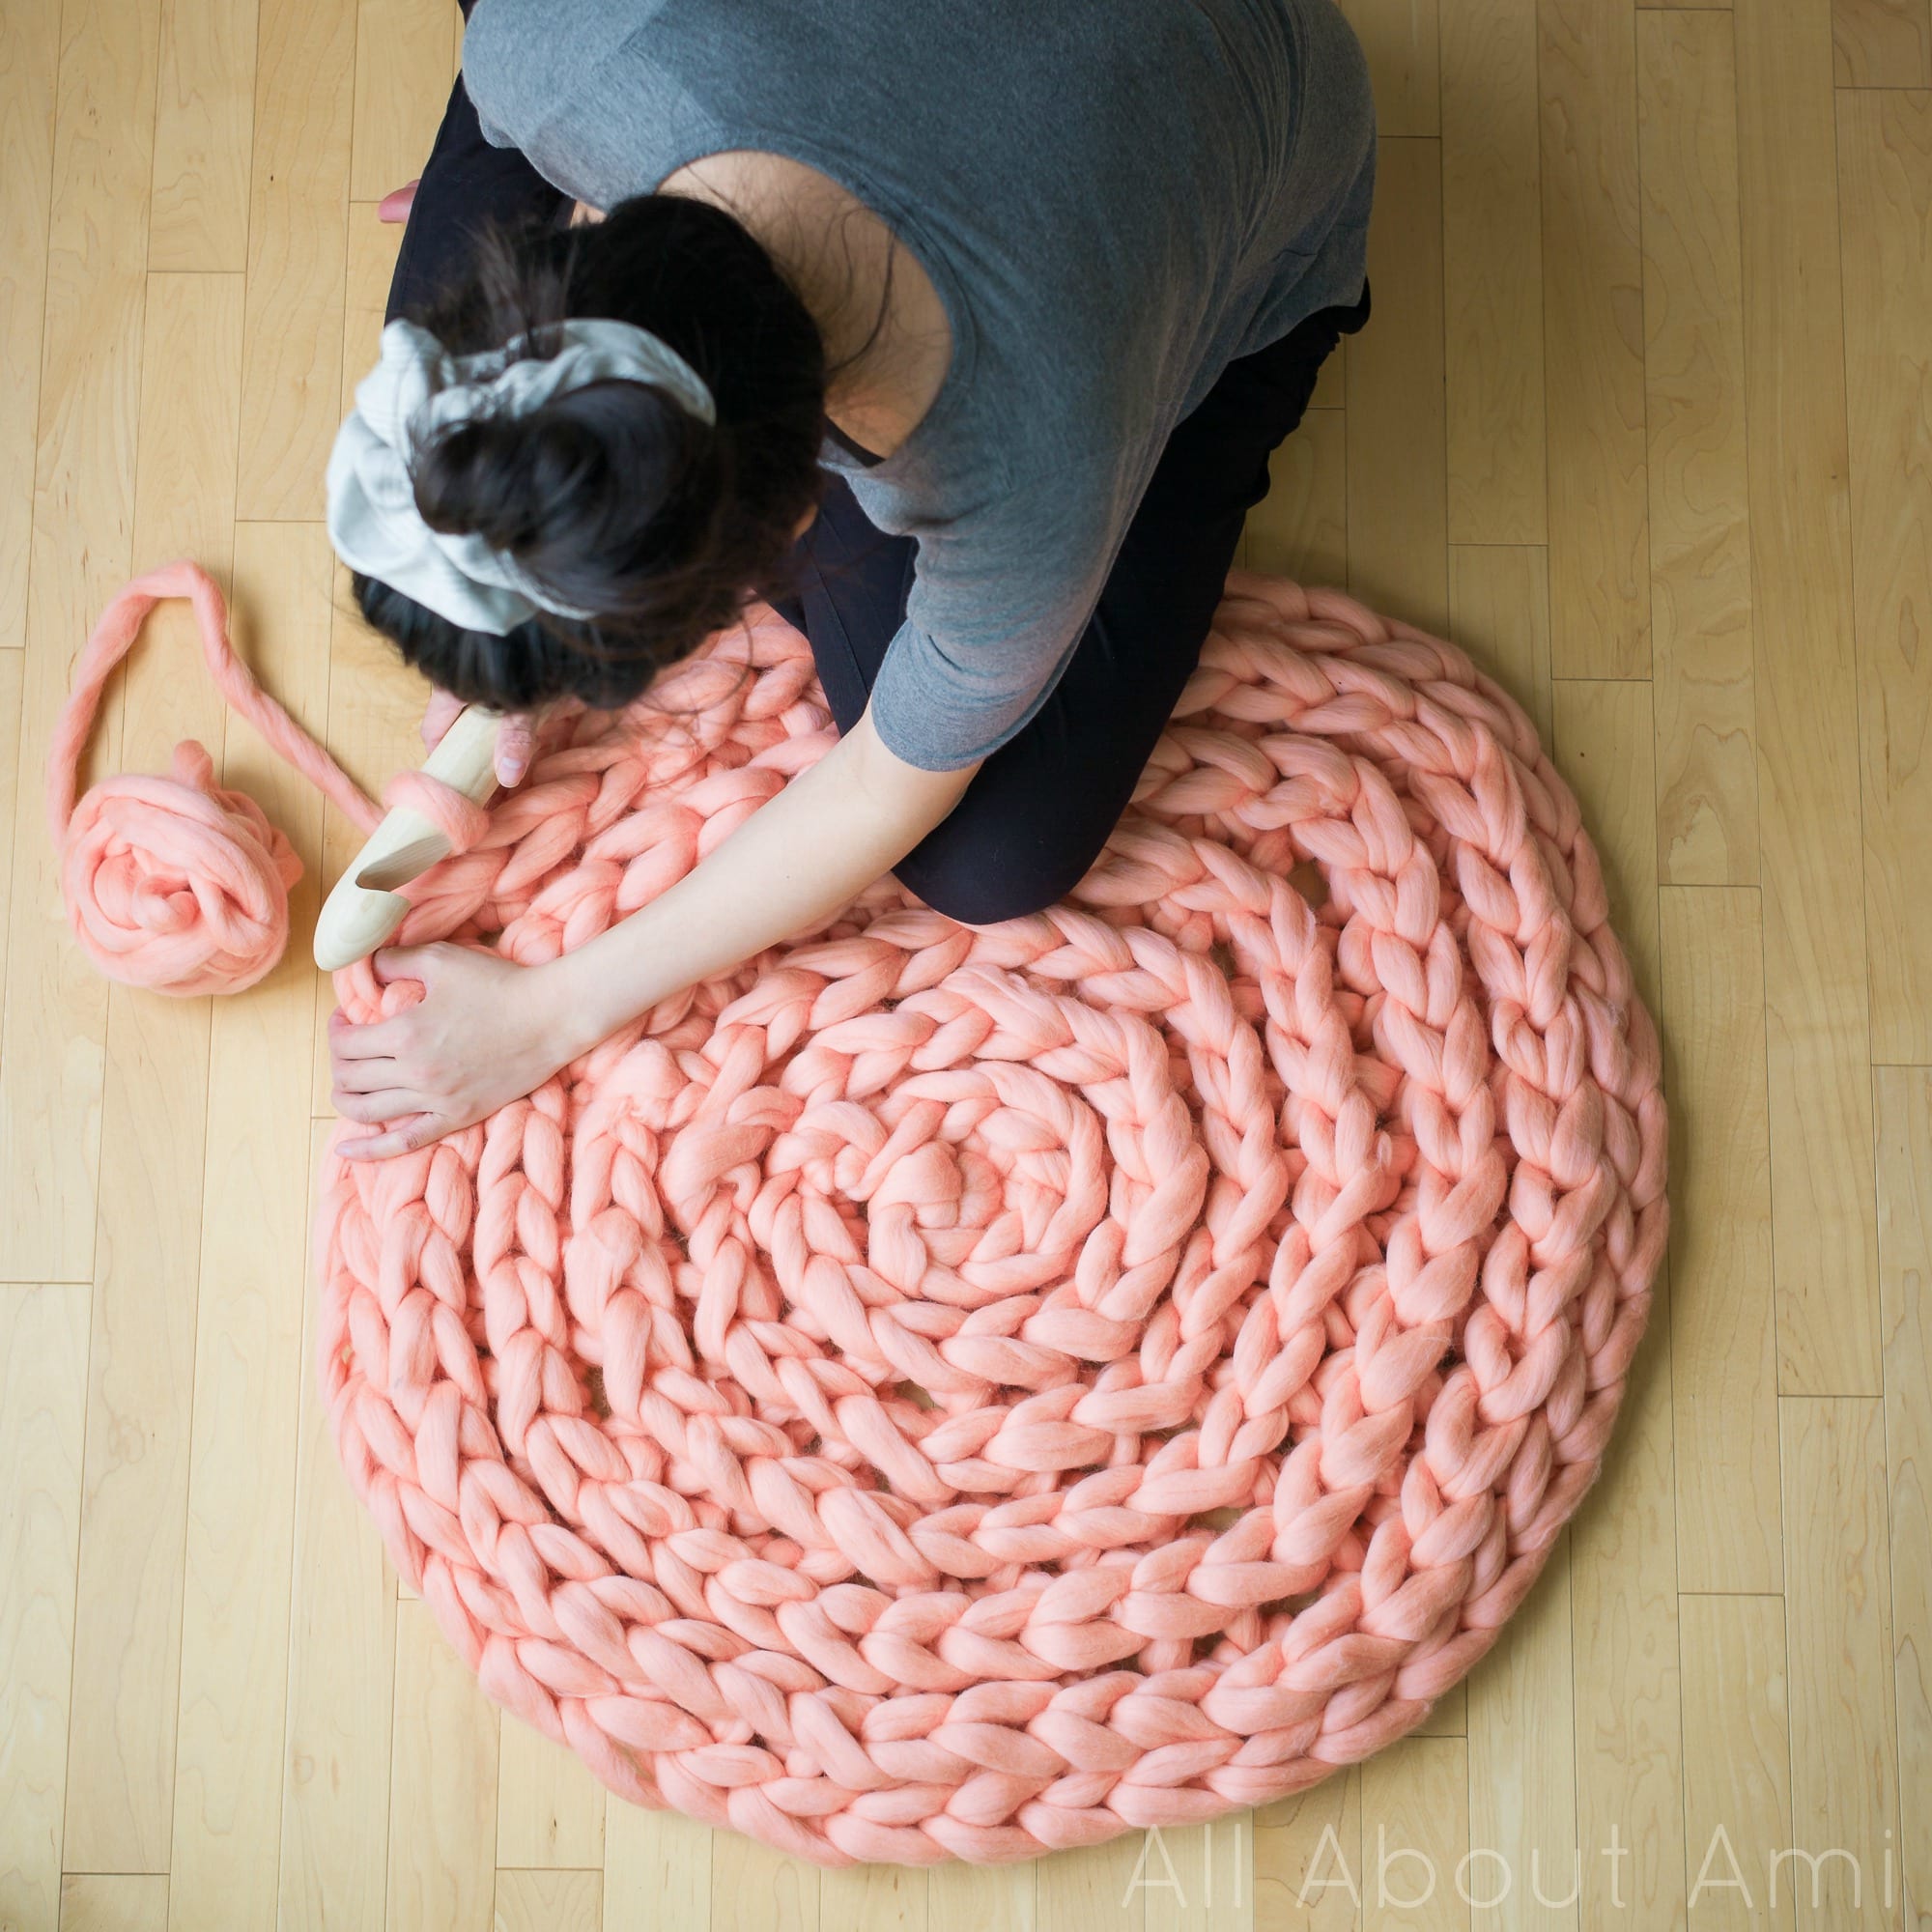 Extreme Crocheted Rug All About Ami, Hand Crochet Rug